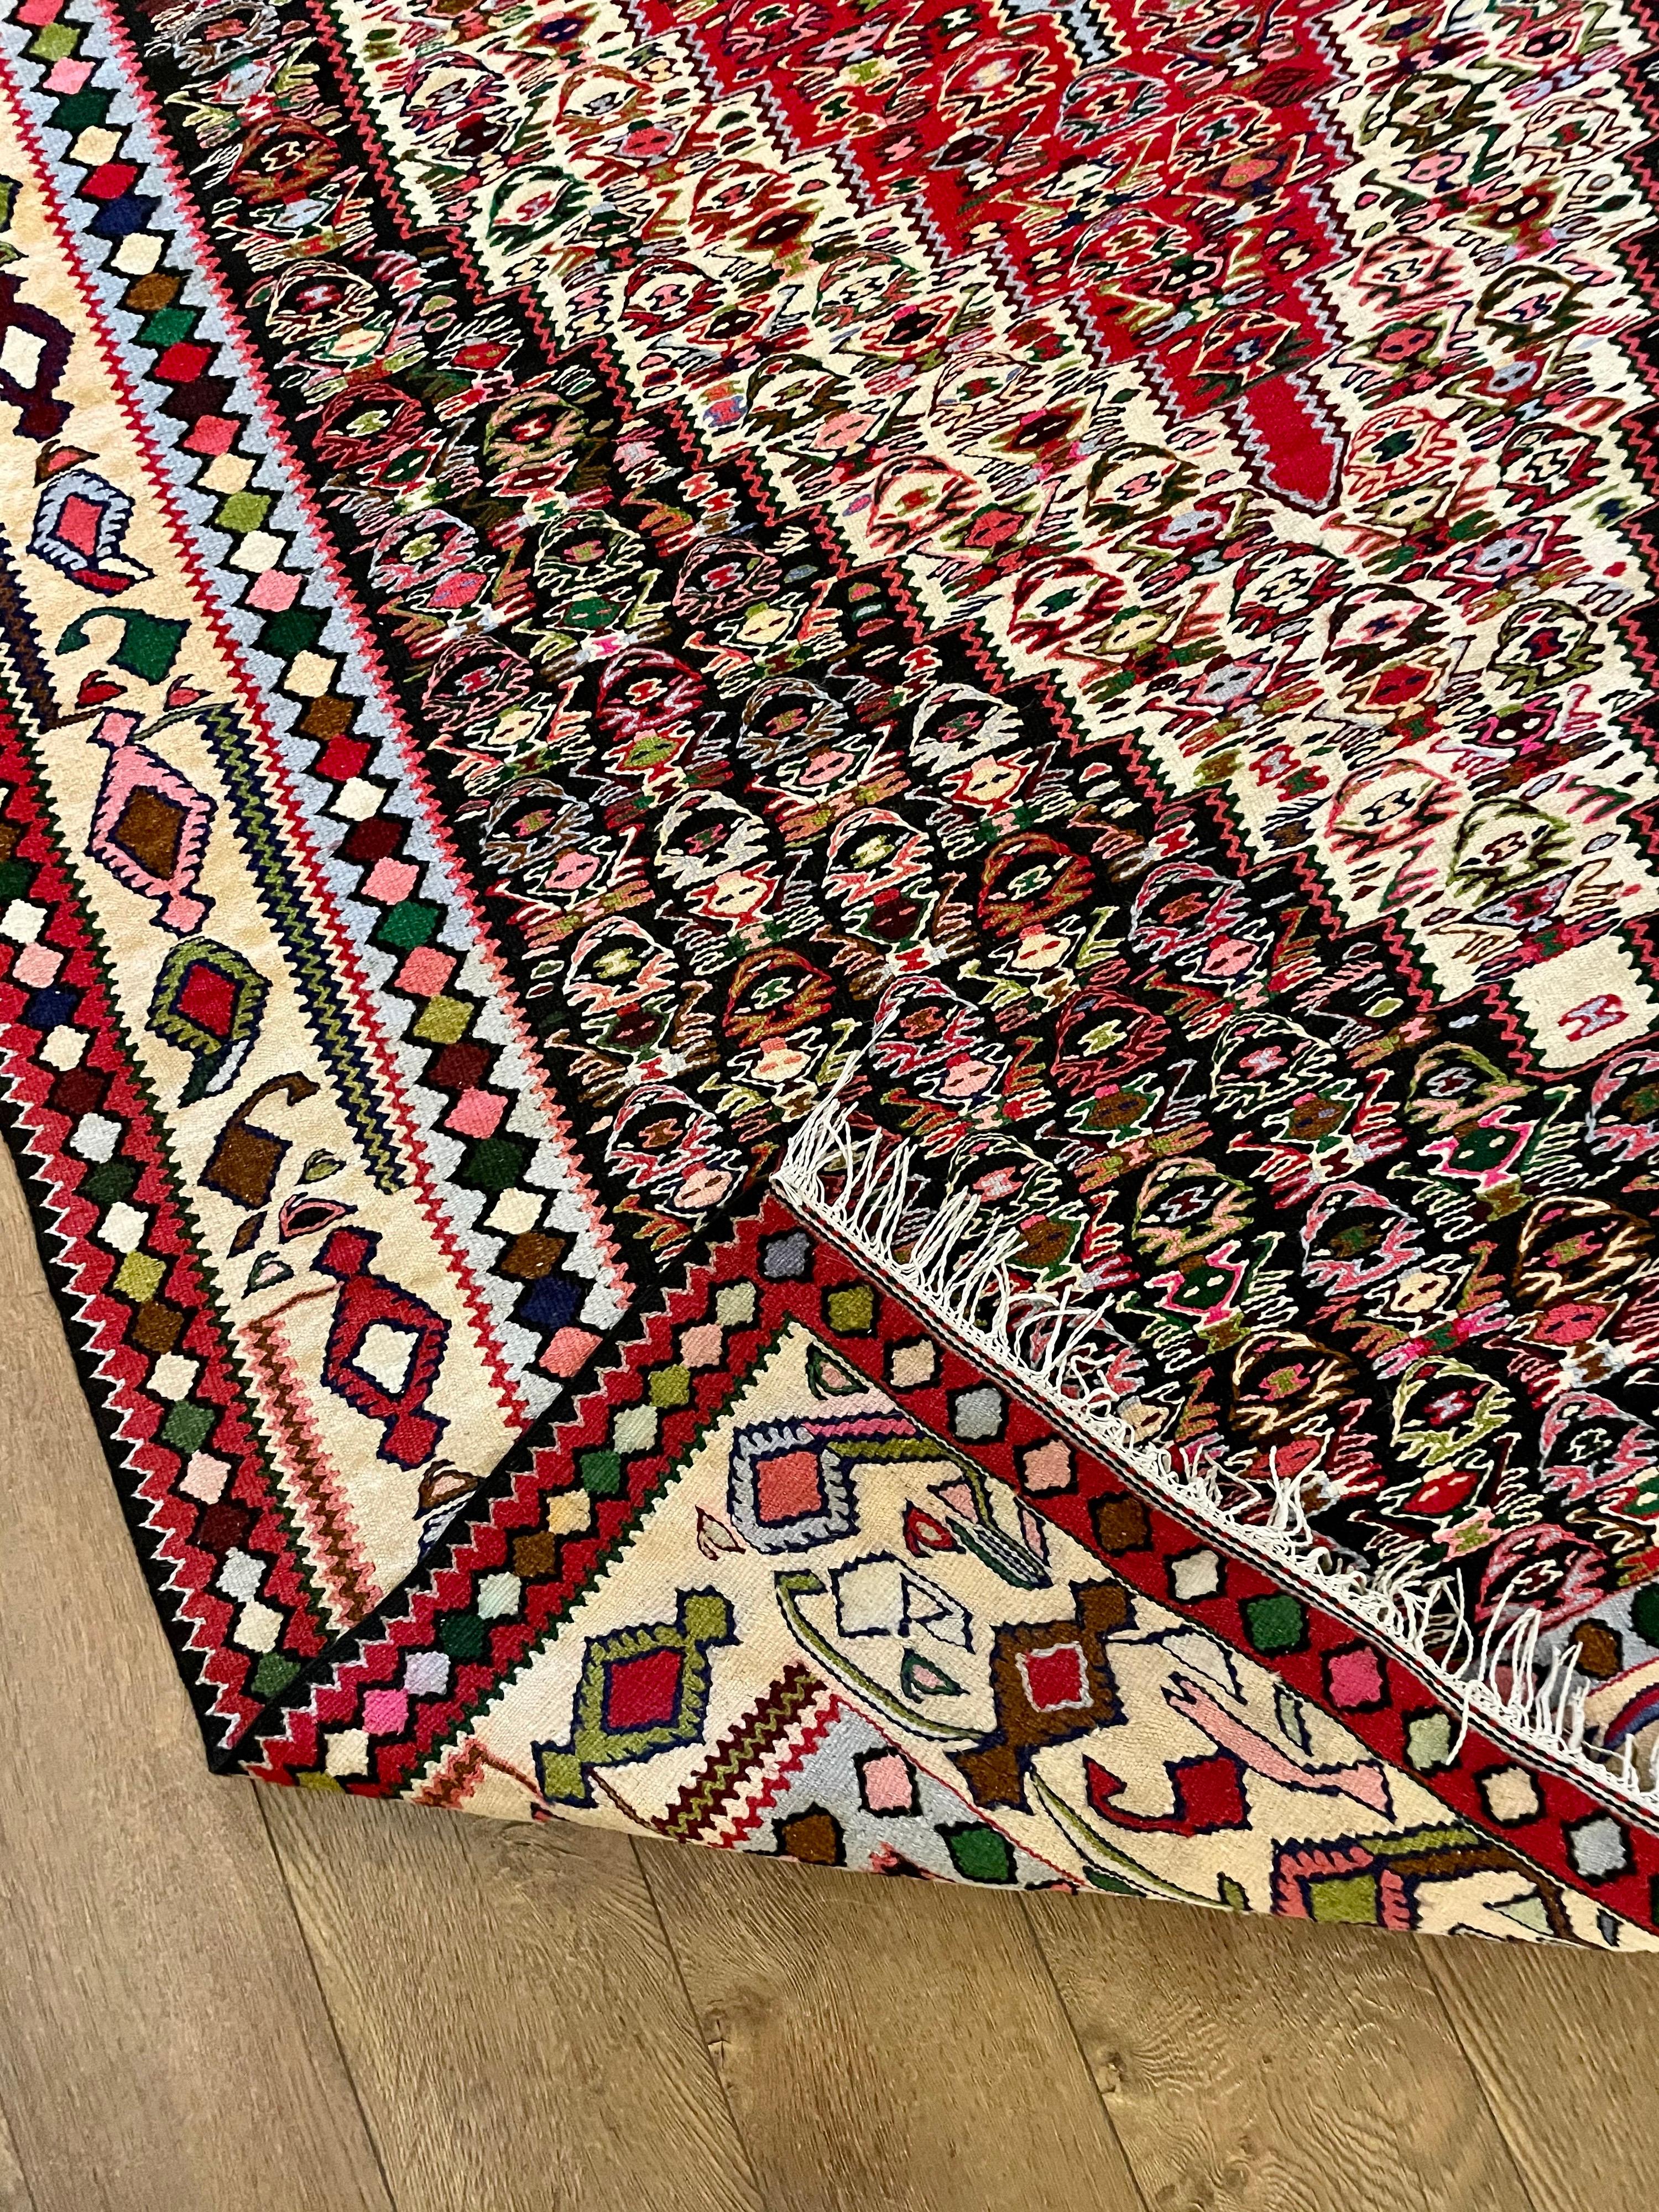 Beautiful & Colorful Antique Persian Kilim Rug In Excellent Condition For Sale In San Diego, CA